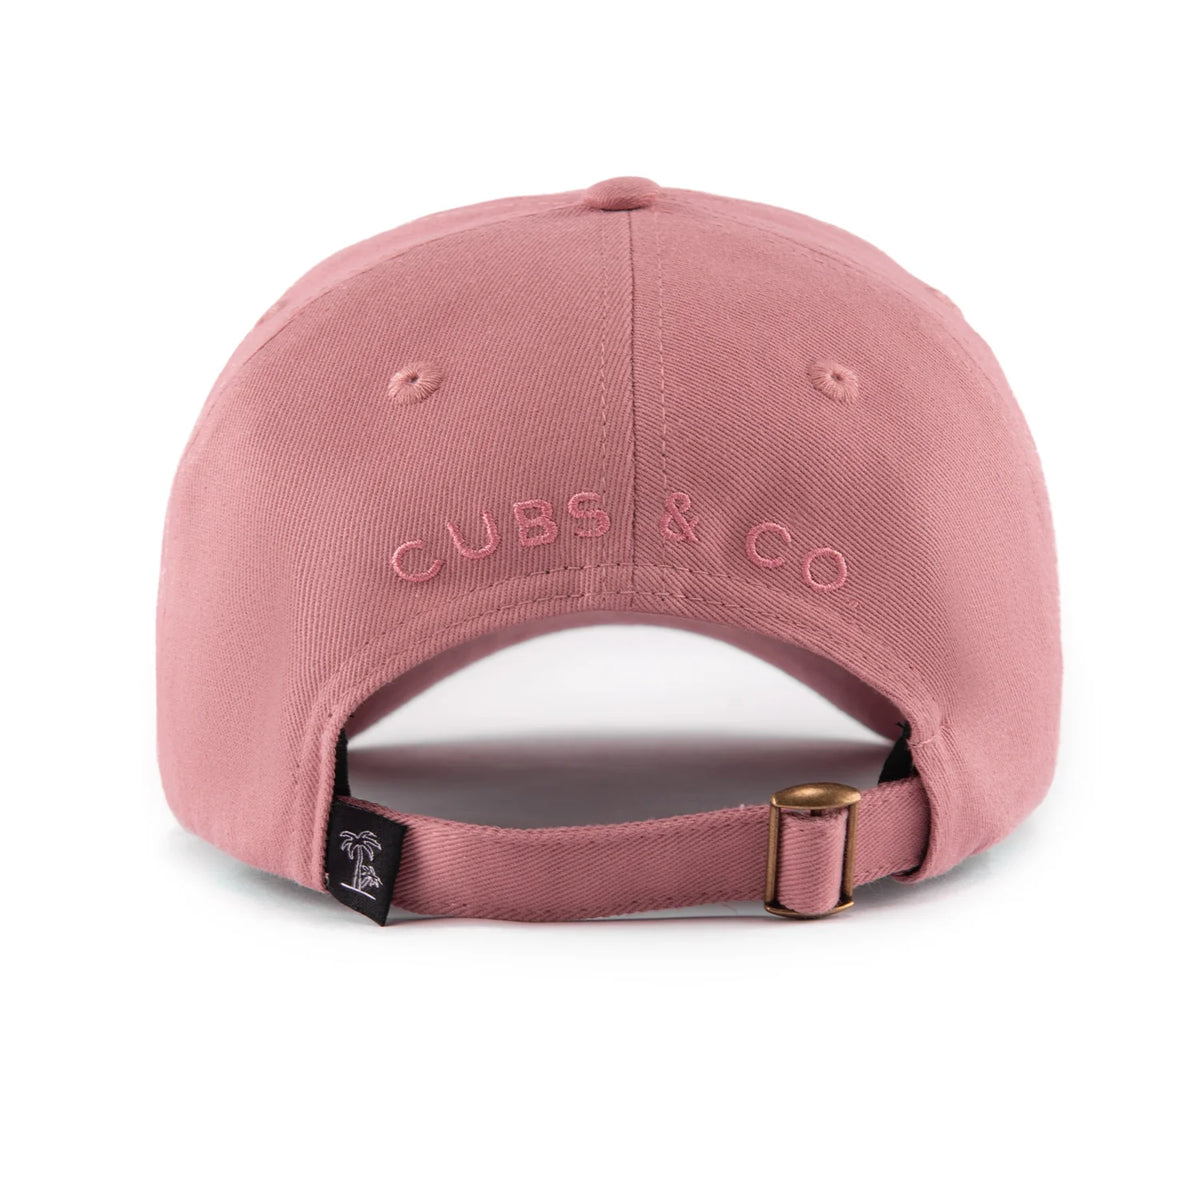 Cubs & Co - Dusty Rose Good Vibes Cap